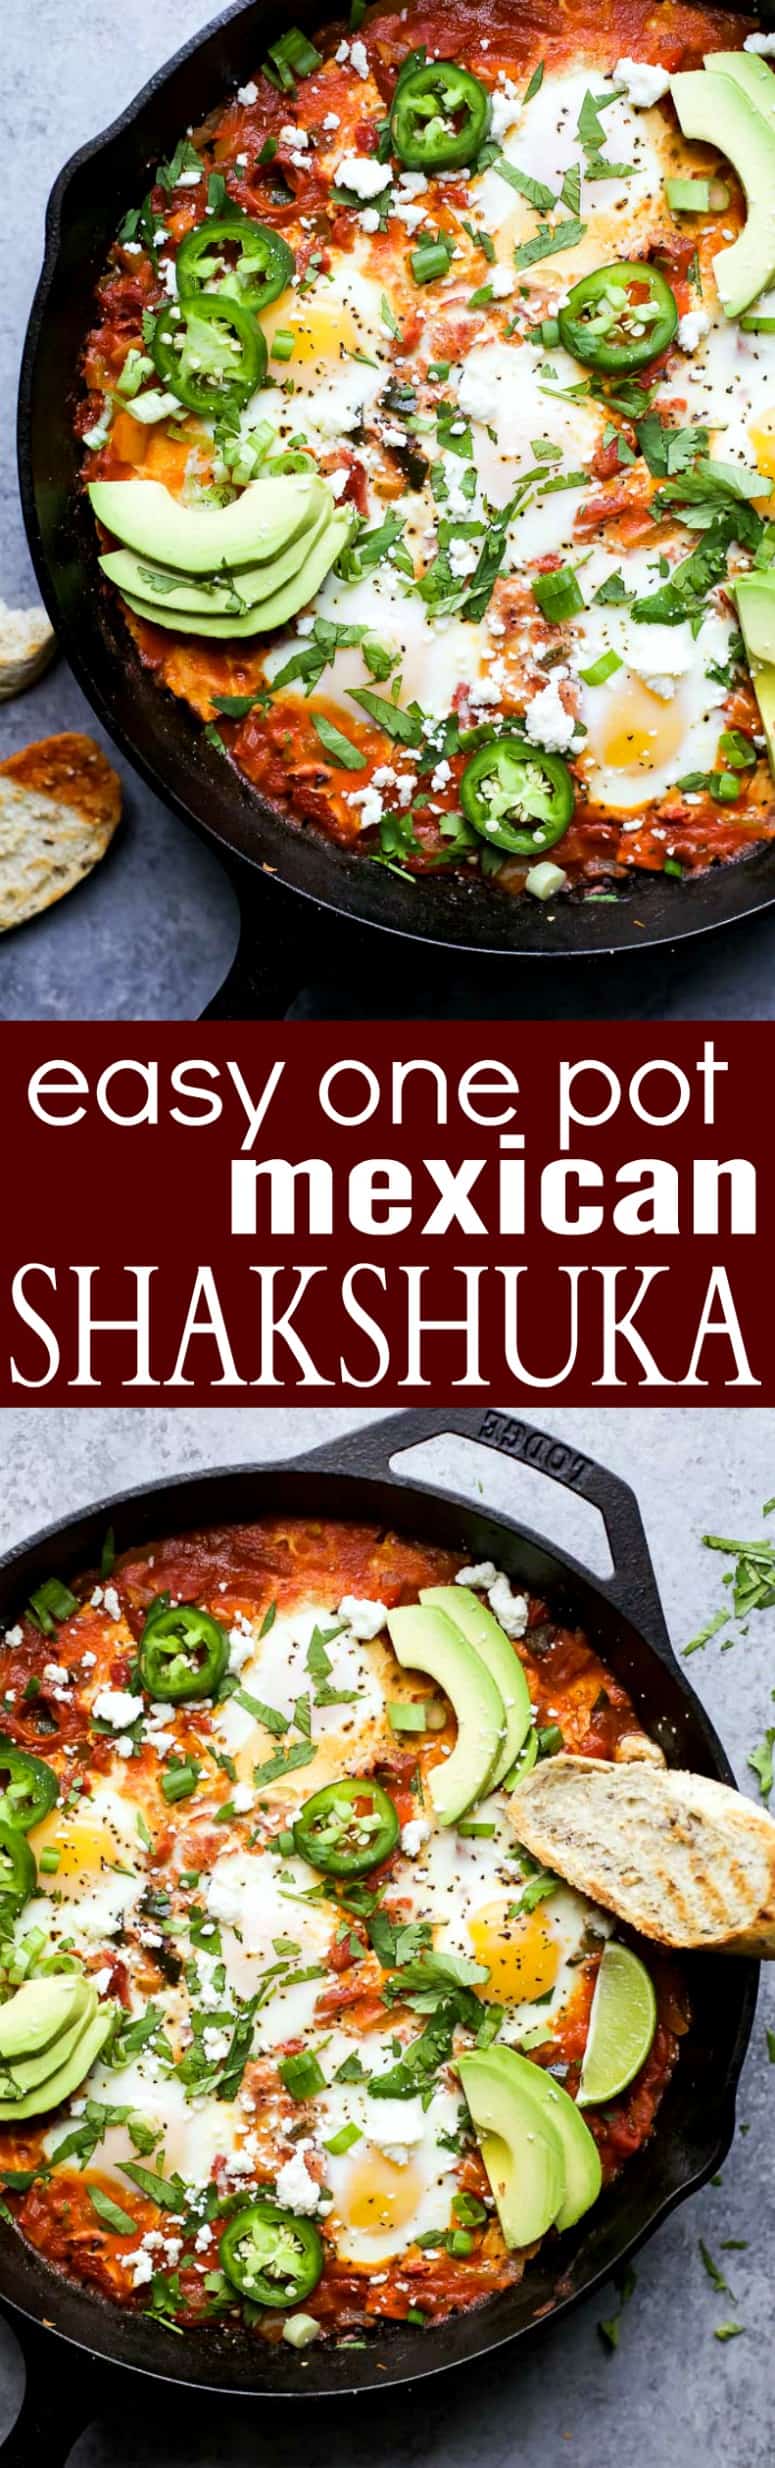 A collage of two images of Mexican shakshouka in a black skillet